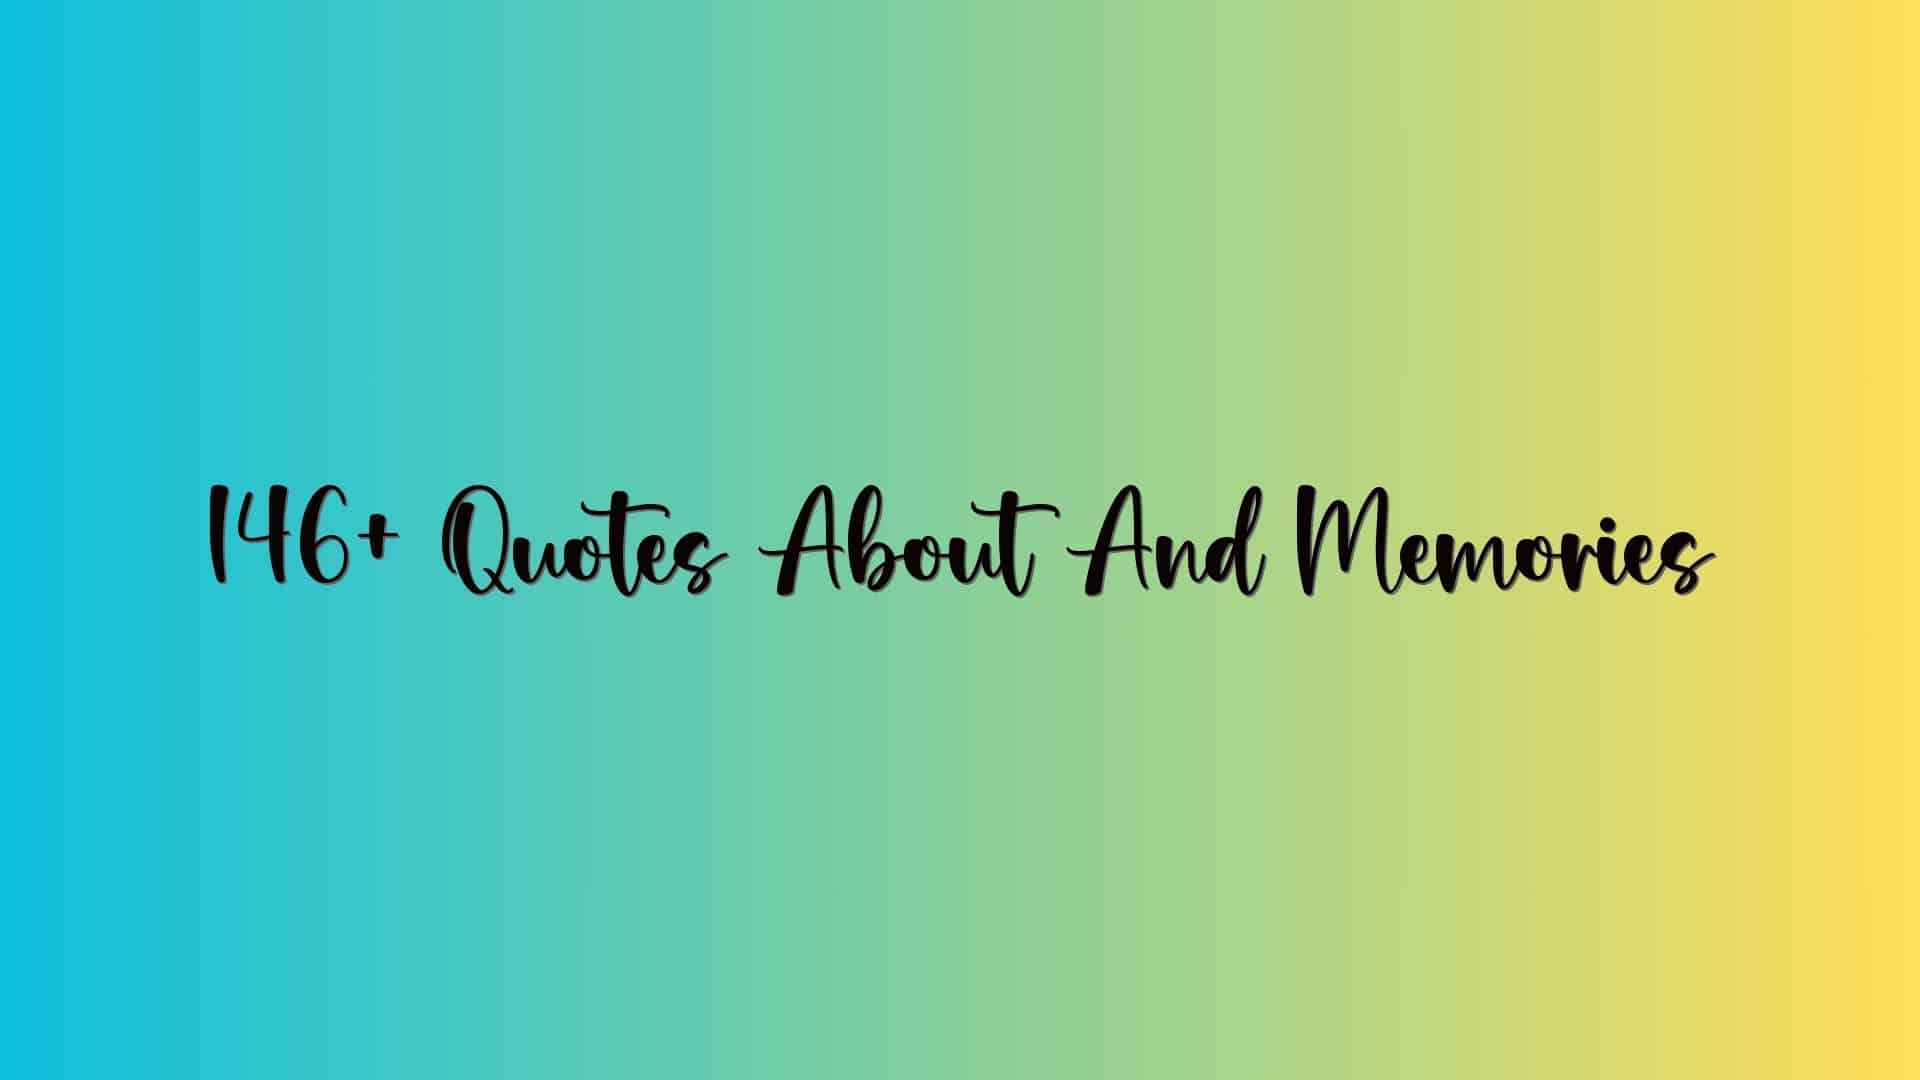 146+ Quotes About And Memories